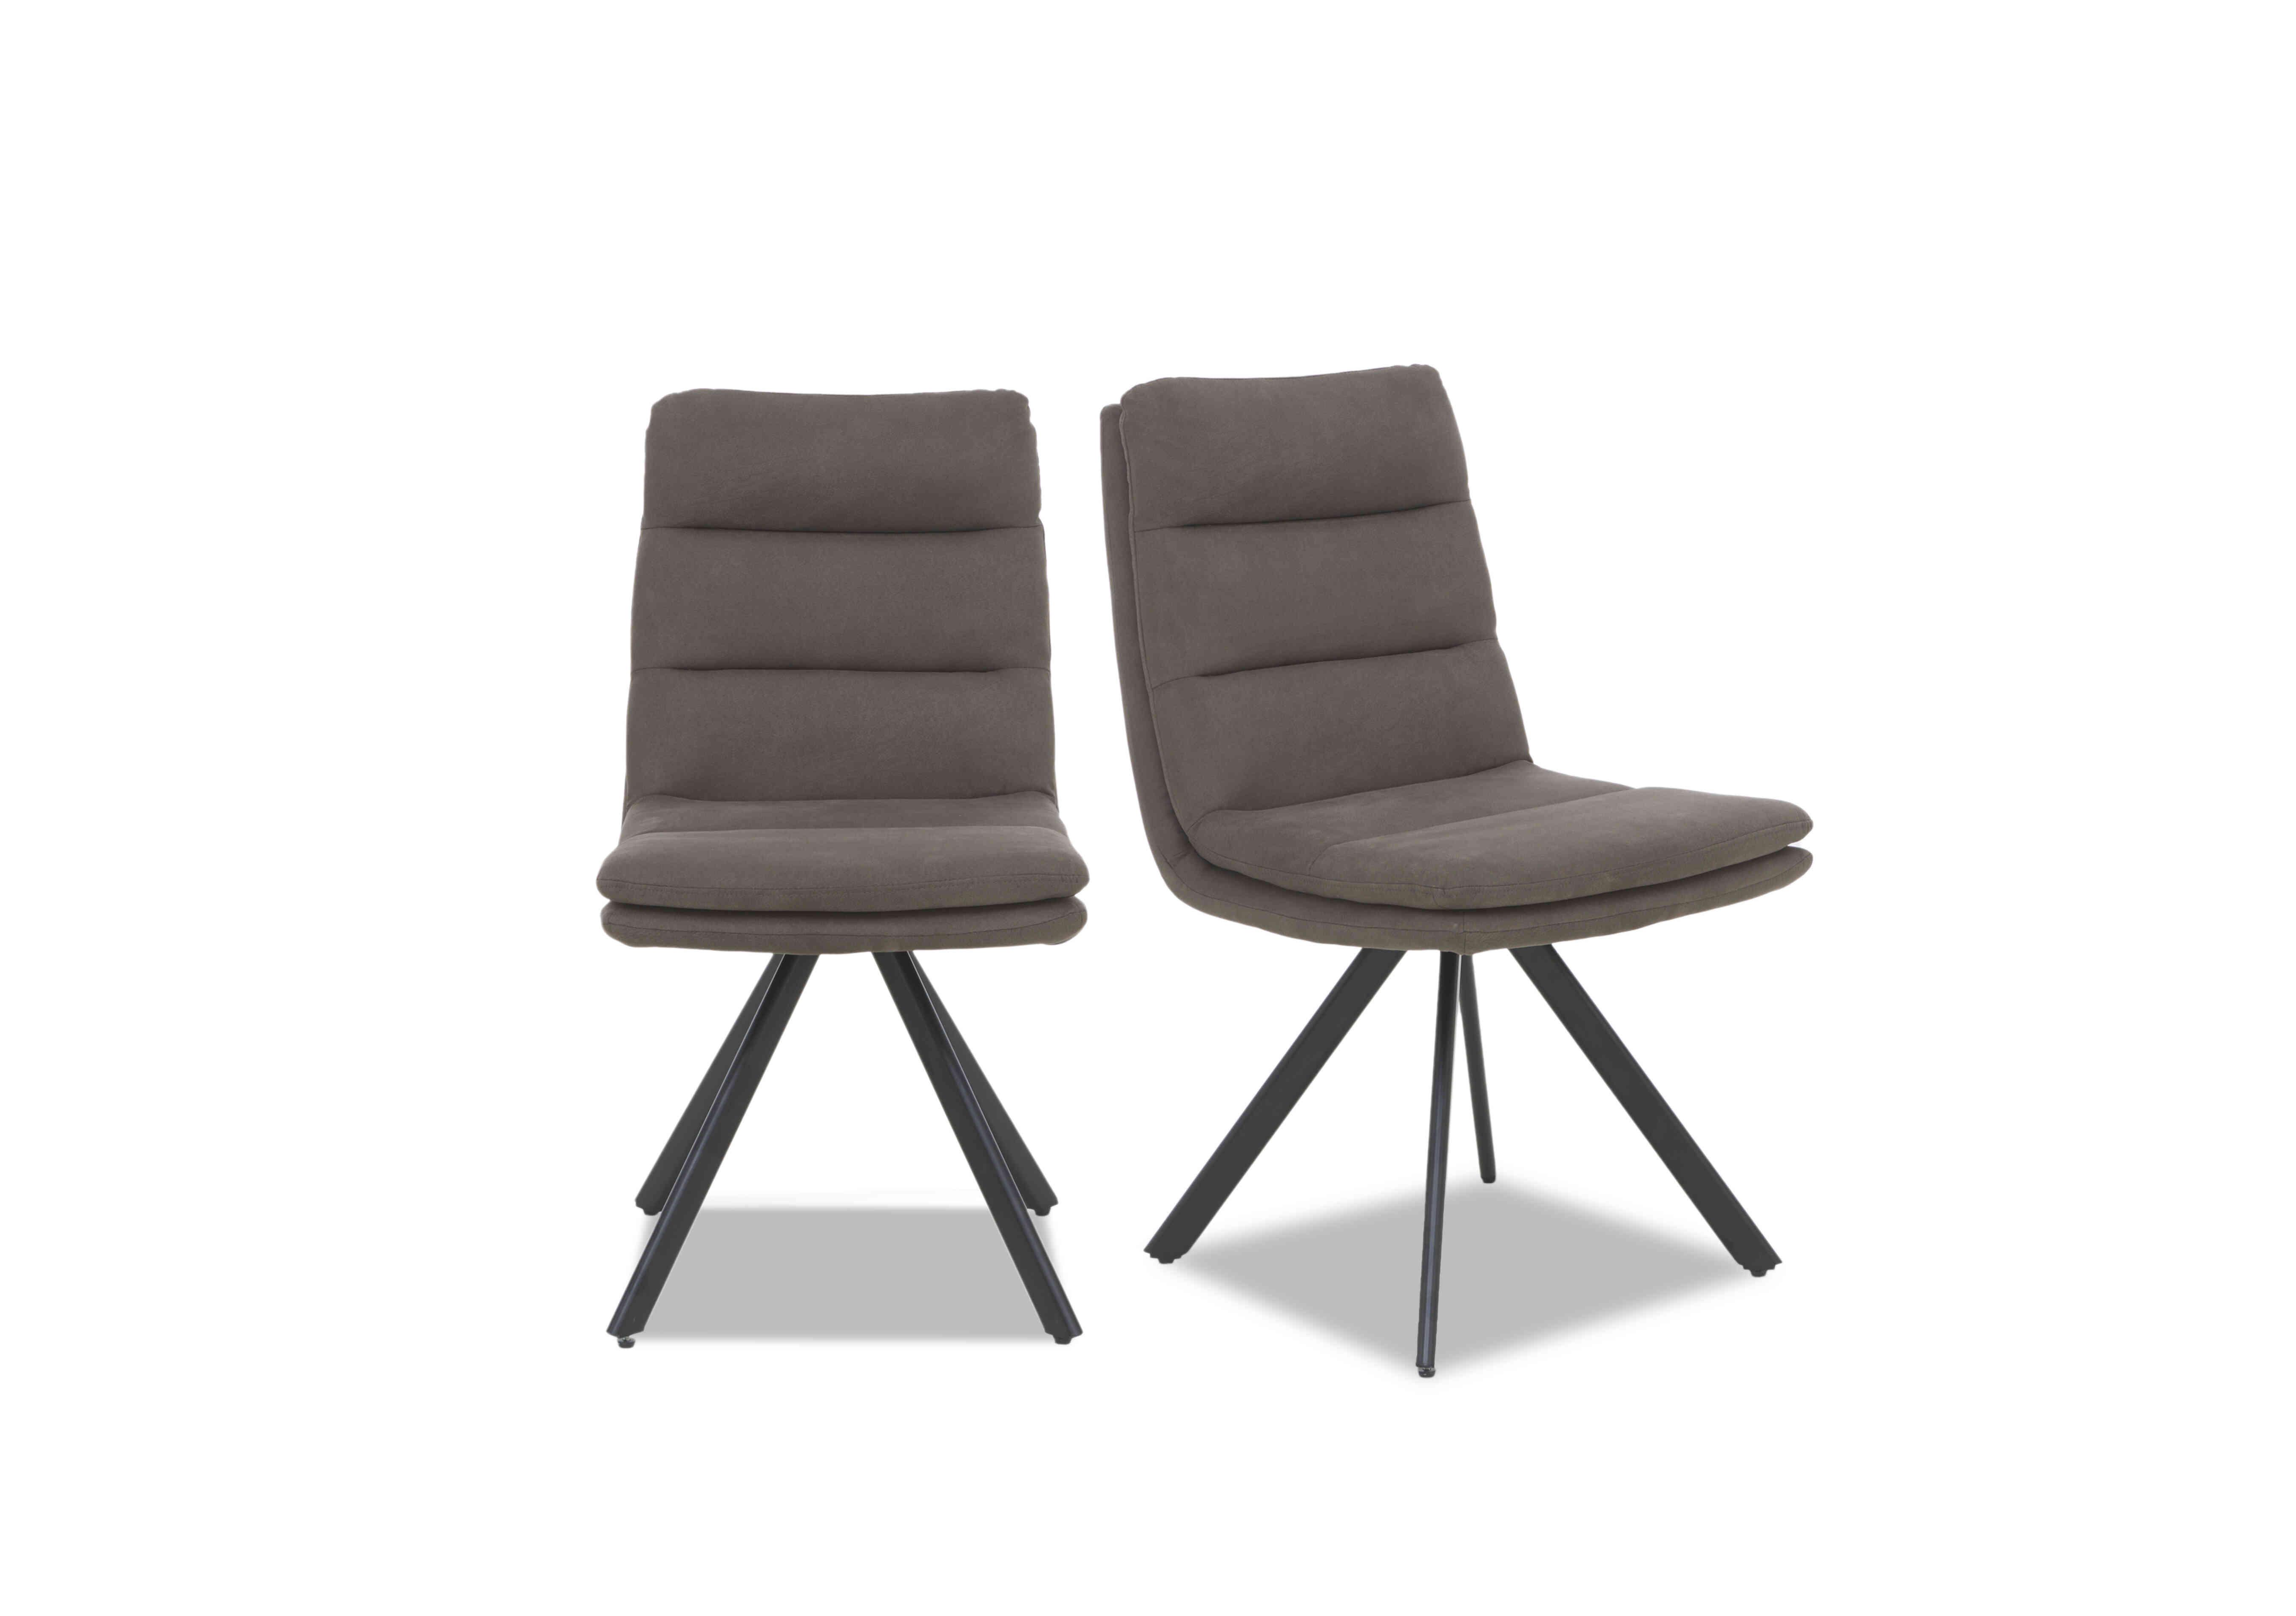 Njord Pair of Dining Chairs in Anthracite on Furniture Village